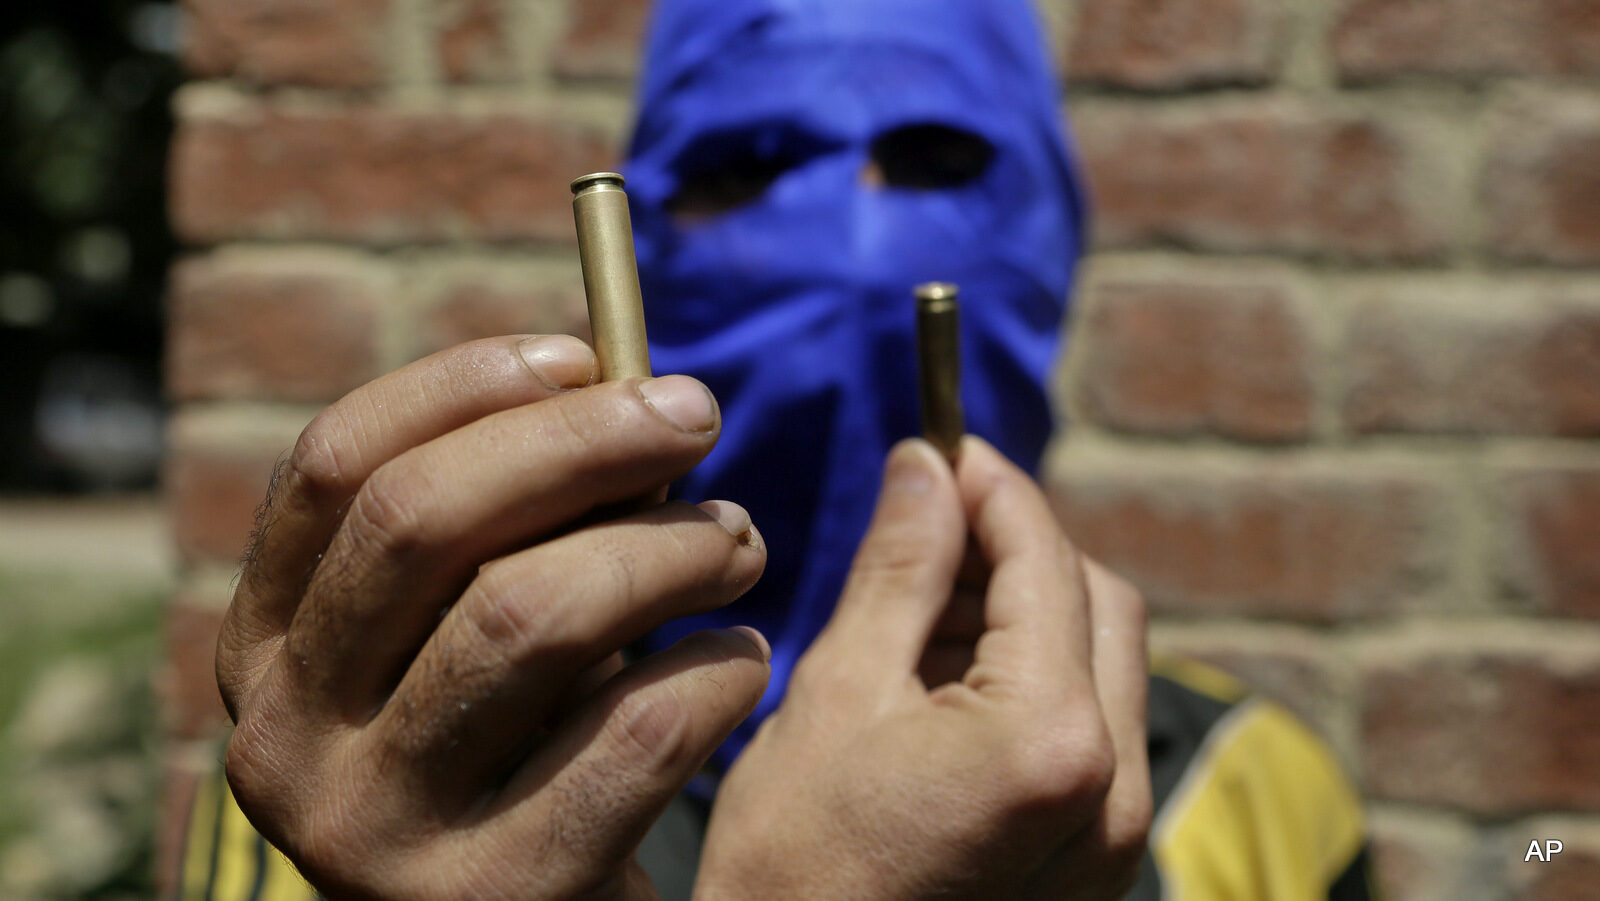 A masked Kashmiri youth shows empty bullet cartridges fired by Indian forces during a joint funeral of four civilians at Aripanthan village, west of Srinagar, Indian occupied Kashmir, Tuesday, Aug.16, 2016. Government forces in Indian-controlled Kashmir shot and killed four civilians and injured at least 15 others Tuesday as clashes intensified with anti-India protesters in the troubled region, police said.